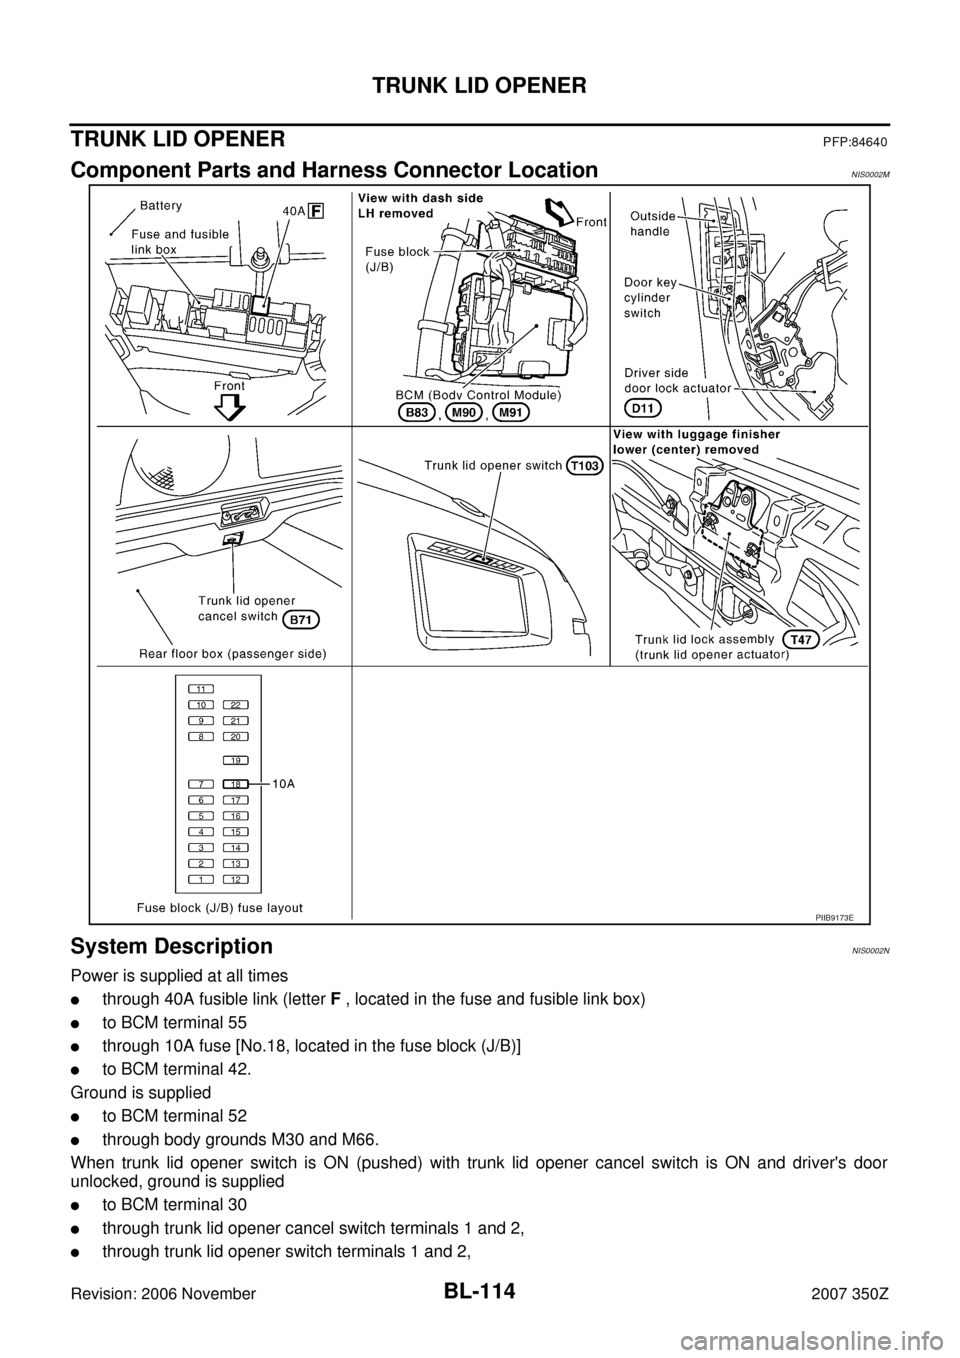 NISSAN 350Z 2007 Z33 Body, Lock And Security System Workshop Manual BL-114
TRUNK LID OPENER
Revision: 2006 November2007 350Z
TRUNK LID OPENERPFP:84640
Component Parts and Harness Connector LocationNIS0002M
System DescriptionNIS0002N
Power is supplied at all times
thr